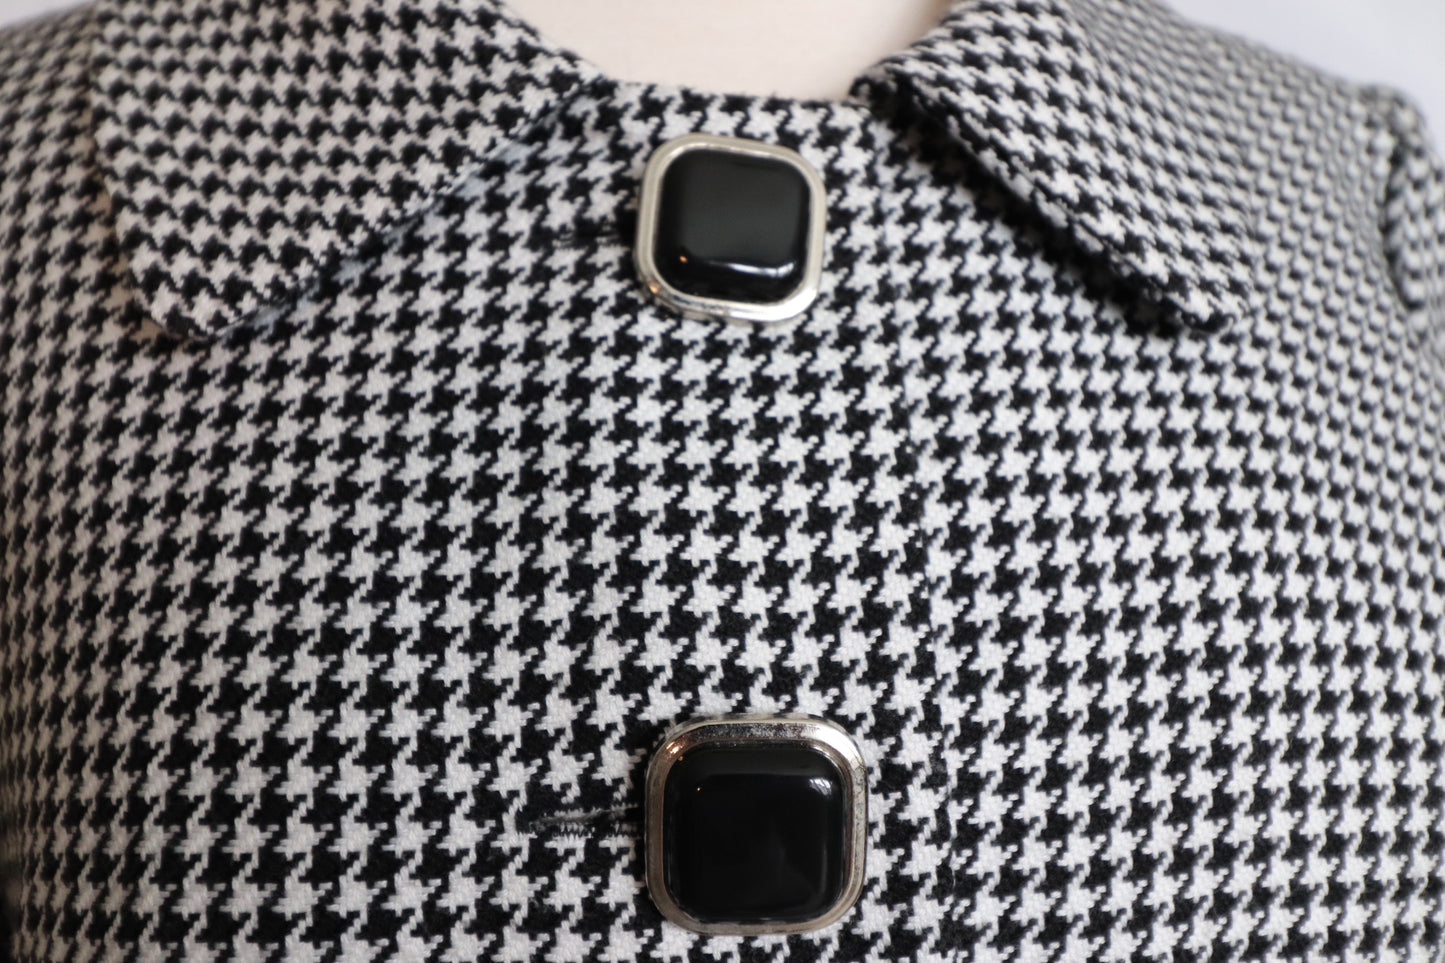 Vintage Houndstooth Jacket with Retro Buttons